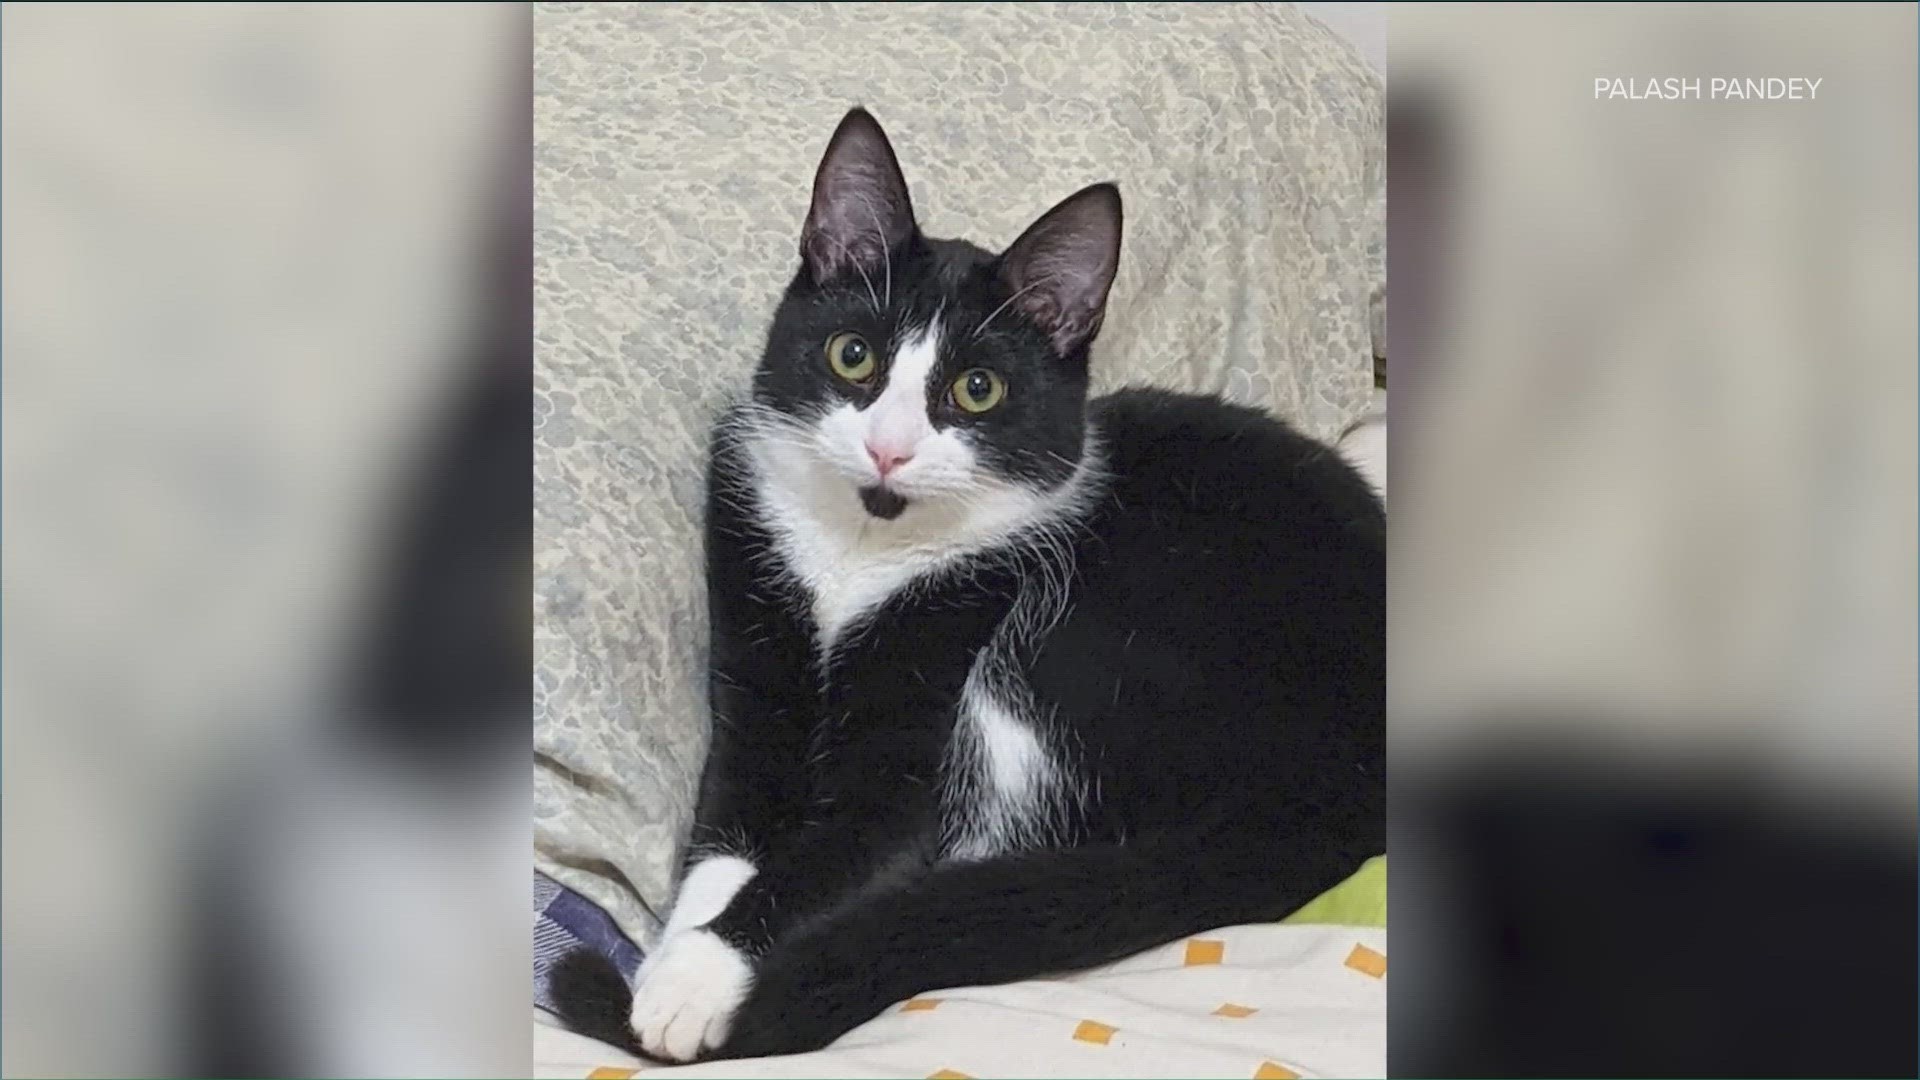 The owner of the cat said his Lyft driver drove off before he could get his cat out of the car. Now, the cat has gone missing.